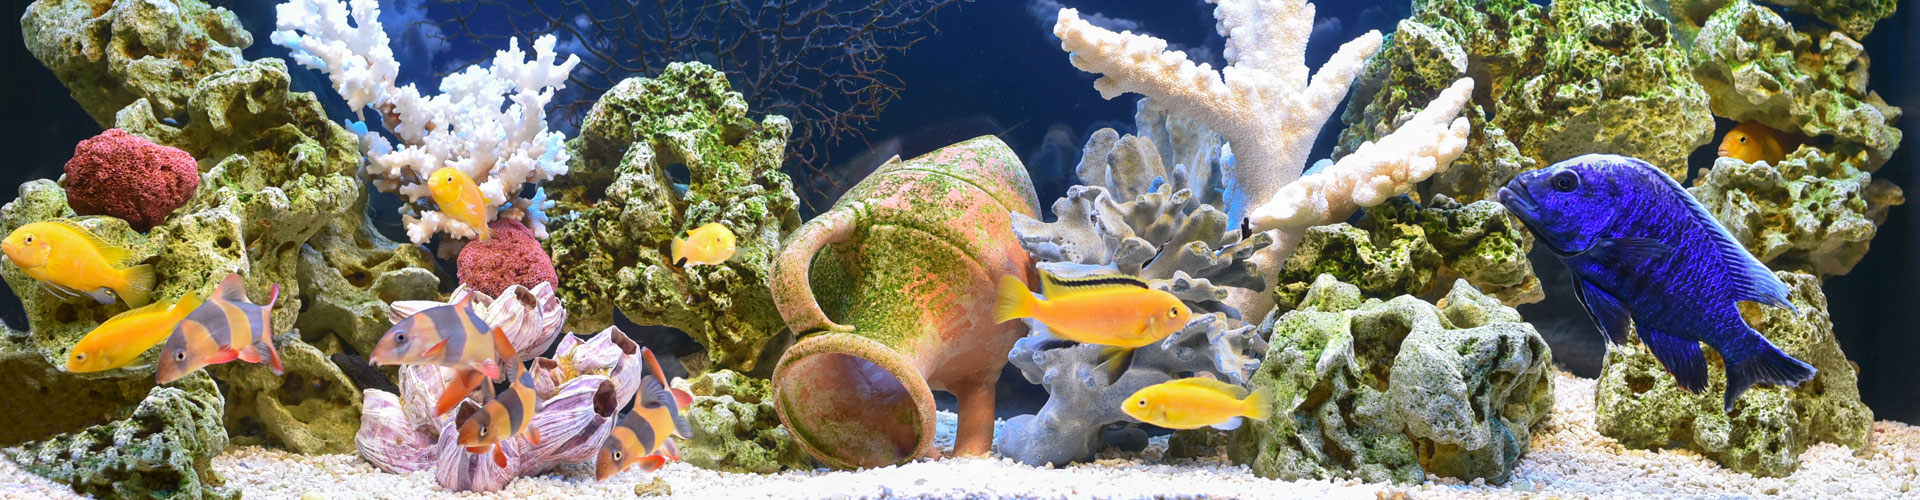 Aquarium with freshwater fish, and various types of aquatic plants and coral